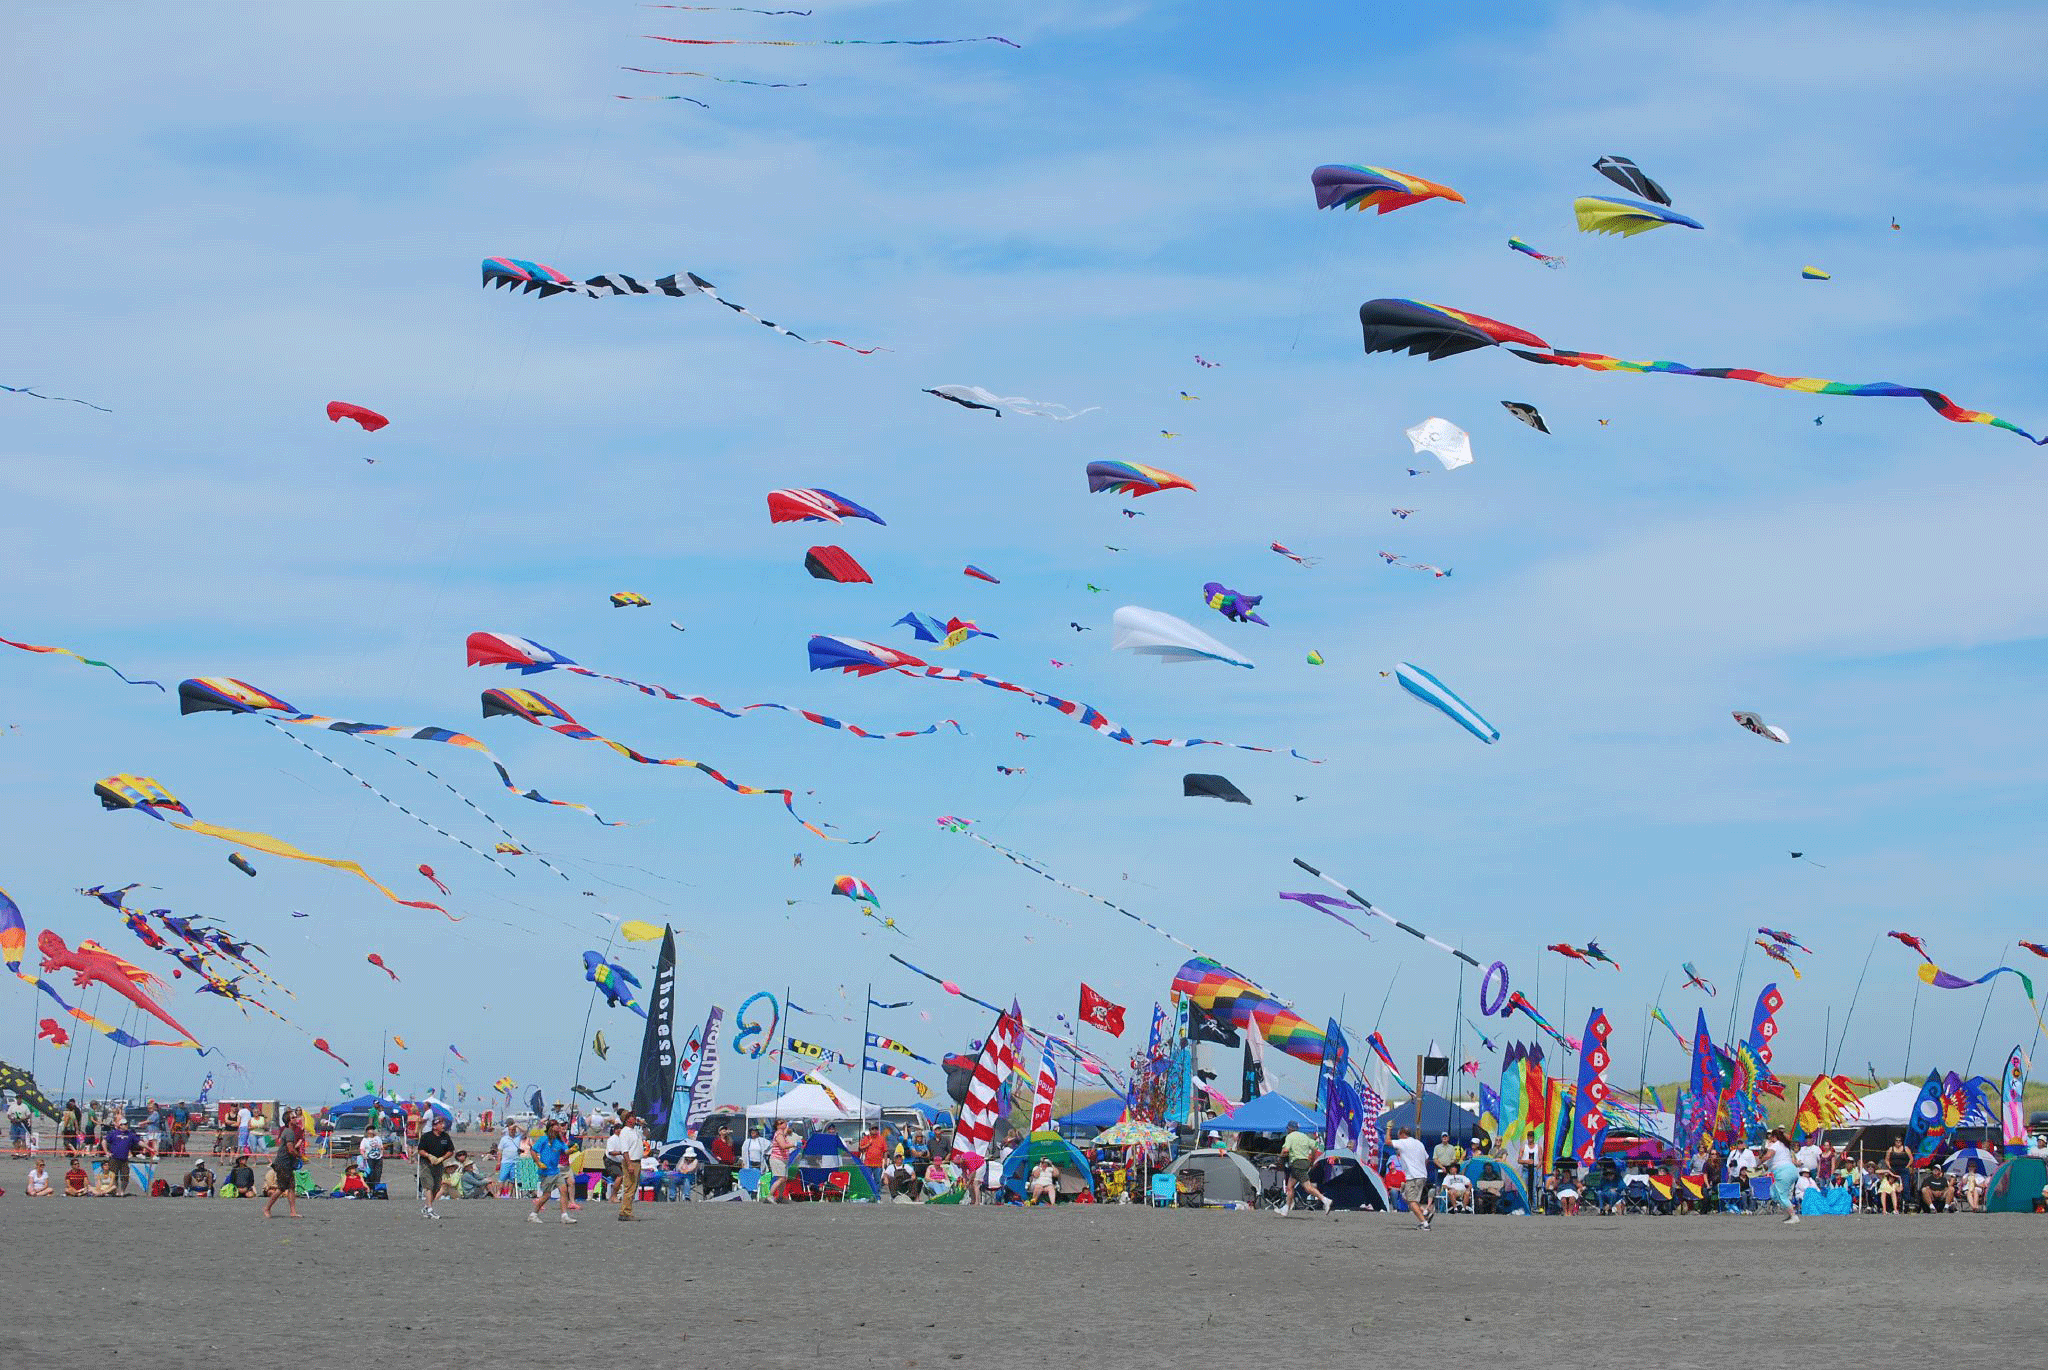 Kites fly high in the air with long tails.